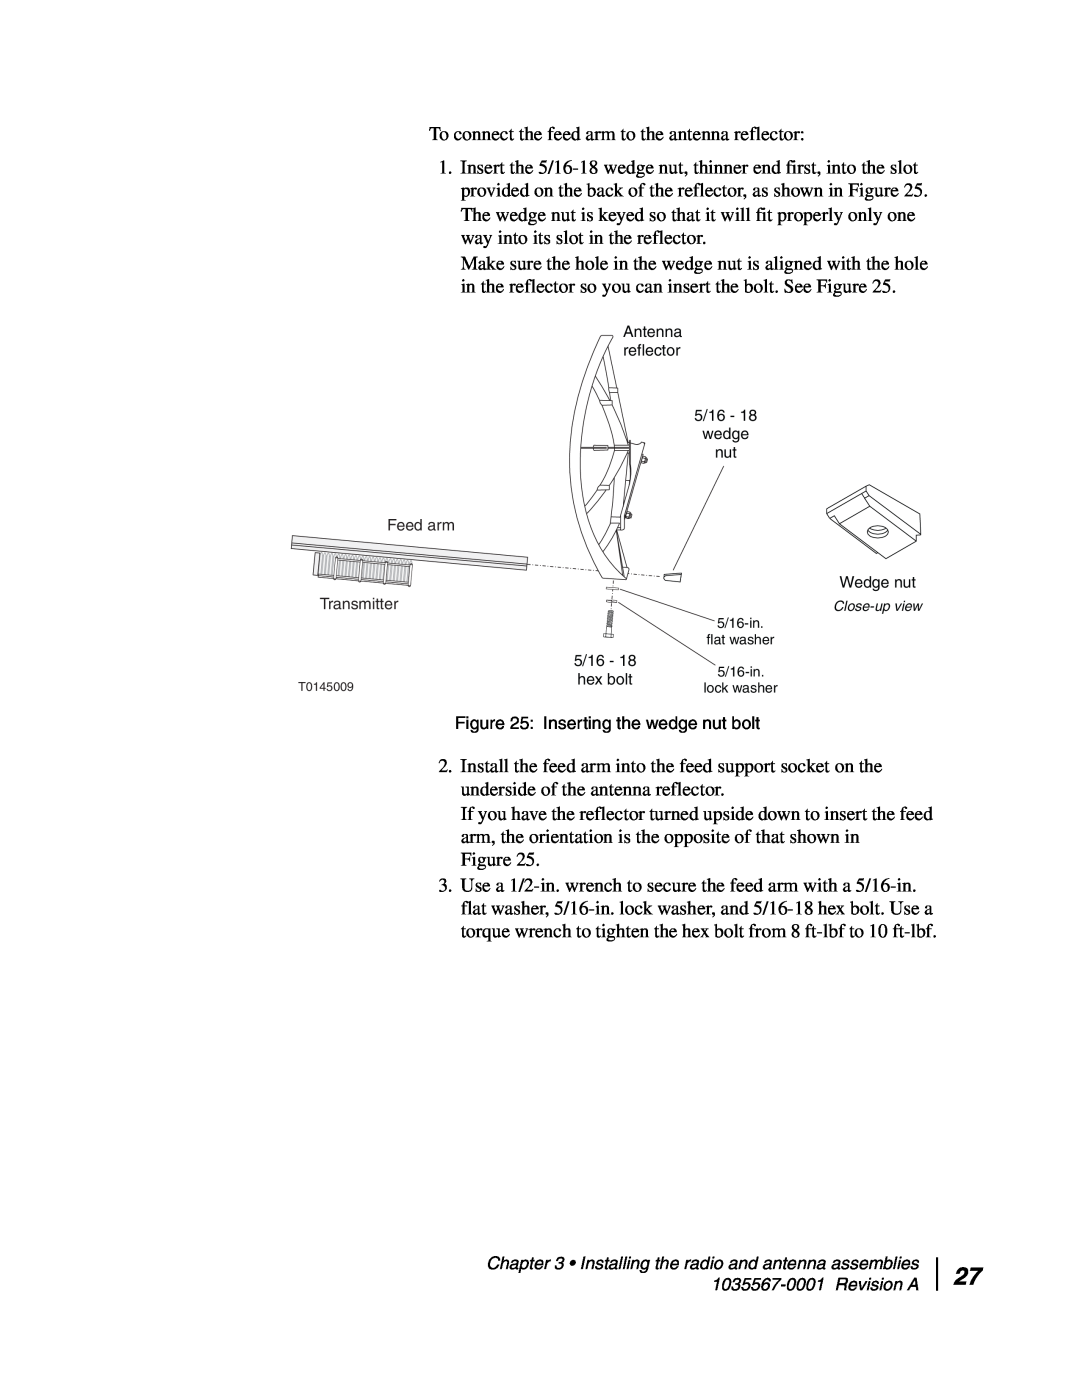 Hughes AN4-074-DF installation manual To connect the feed arm to the antenna reflector 